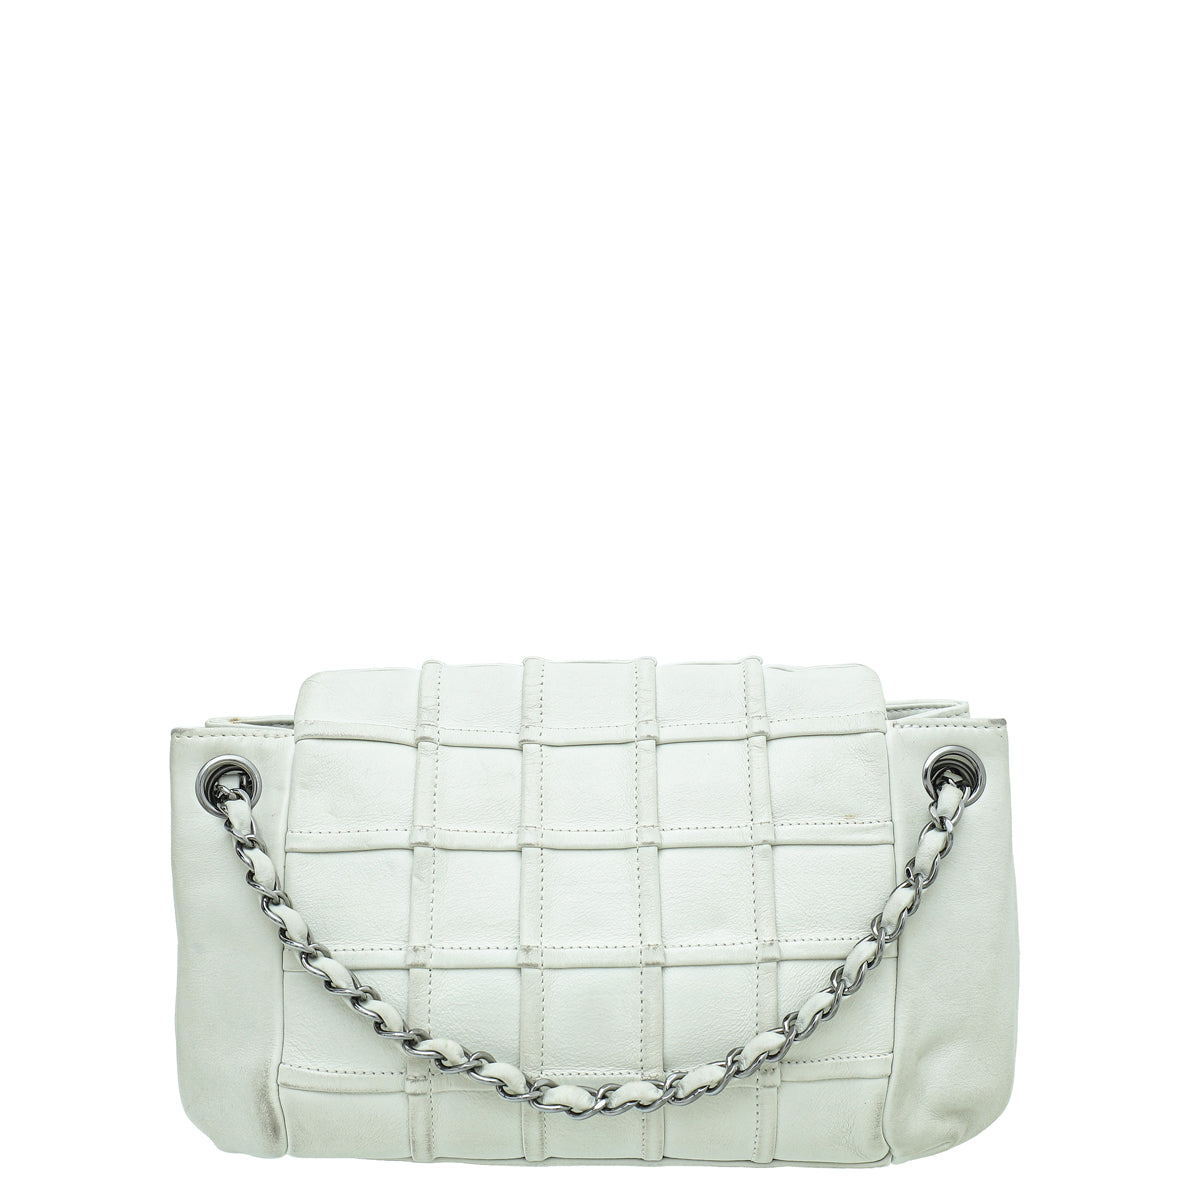 Chanel White Reissue Accordion Small Flap Bag